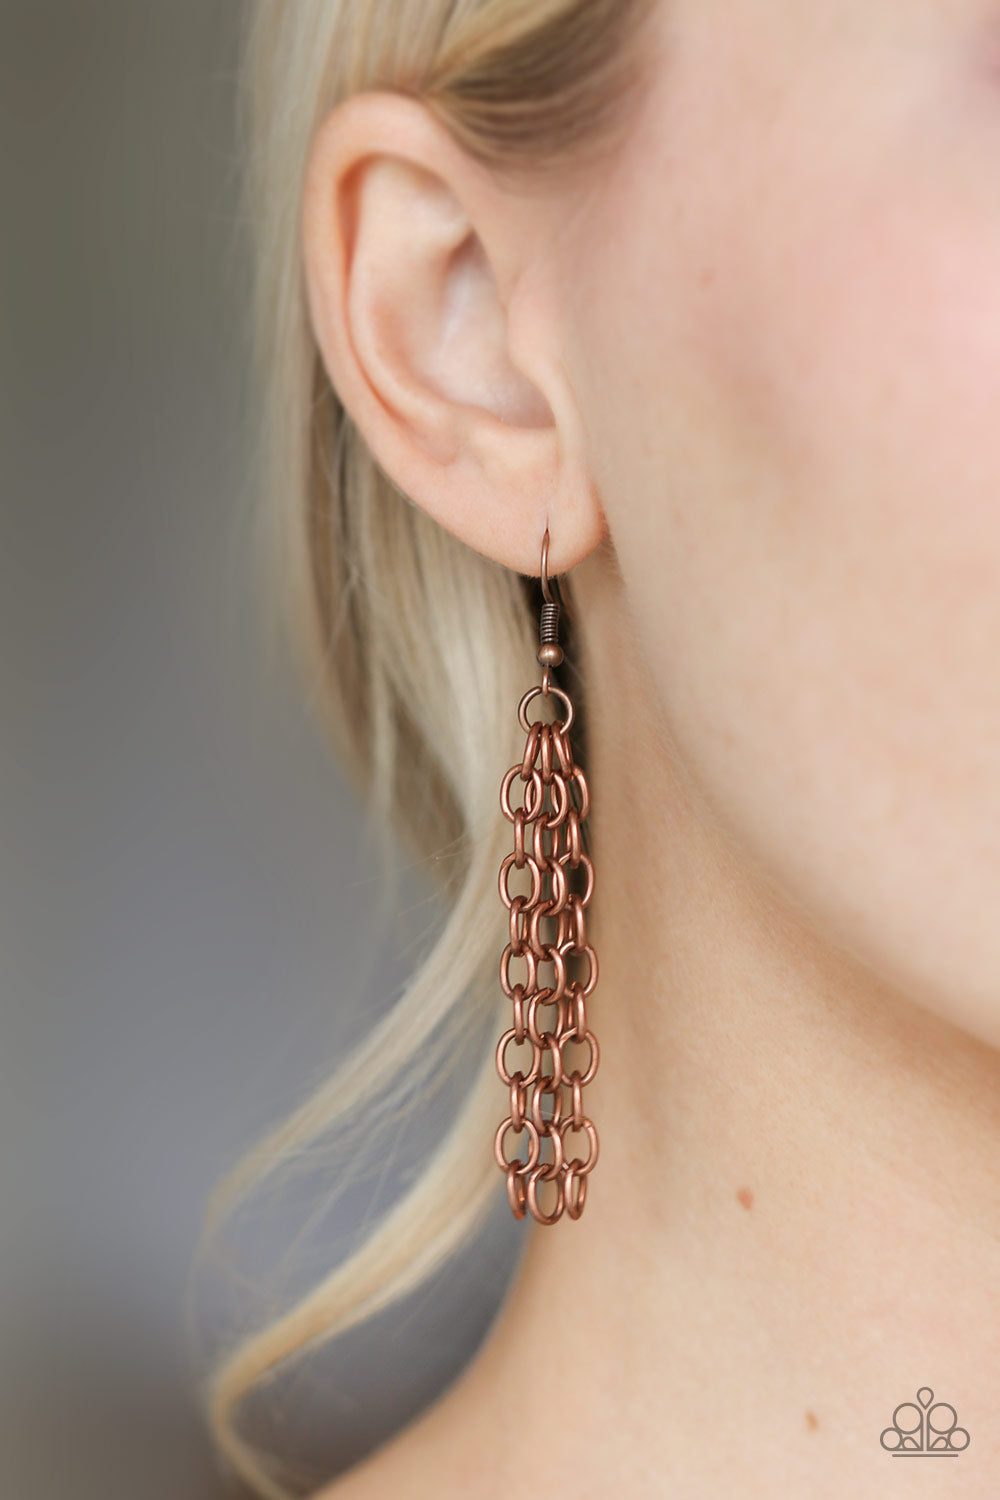 Ready To Pounce - Copper necklace